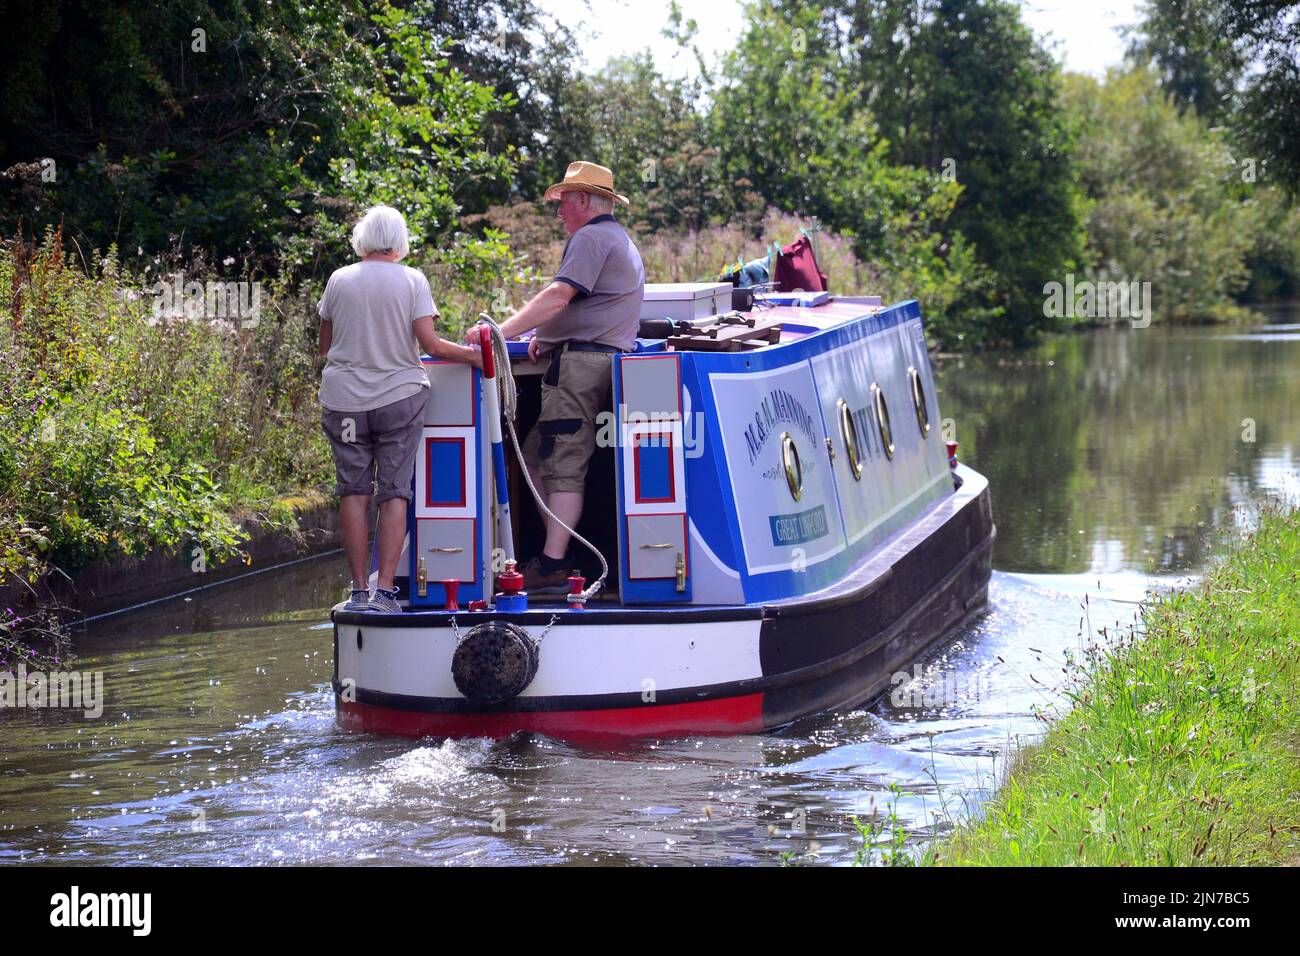 The Canal and River Trust has closed three stretches of popular waterway in Northern England due to low water levels. In early August 2022, the Trust took this step, meaning that other canals may be at risk of closure. Pictured is a narrow boat on the Bridgewater Canal in Cheshire, England, United Kingdom, with a man and a woman at the rear to control the boat's travel. Stock Photo